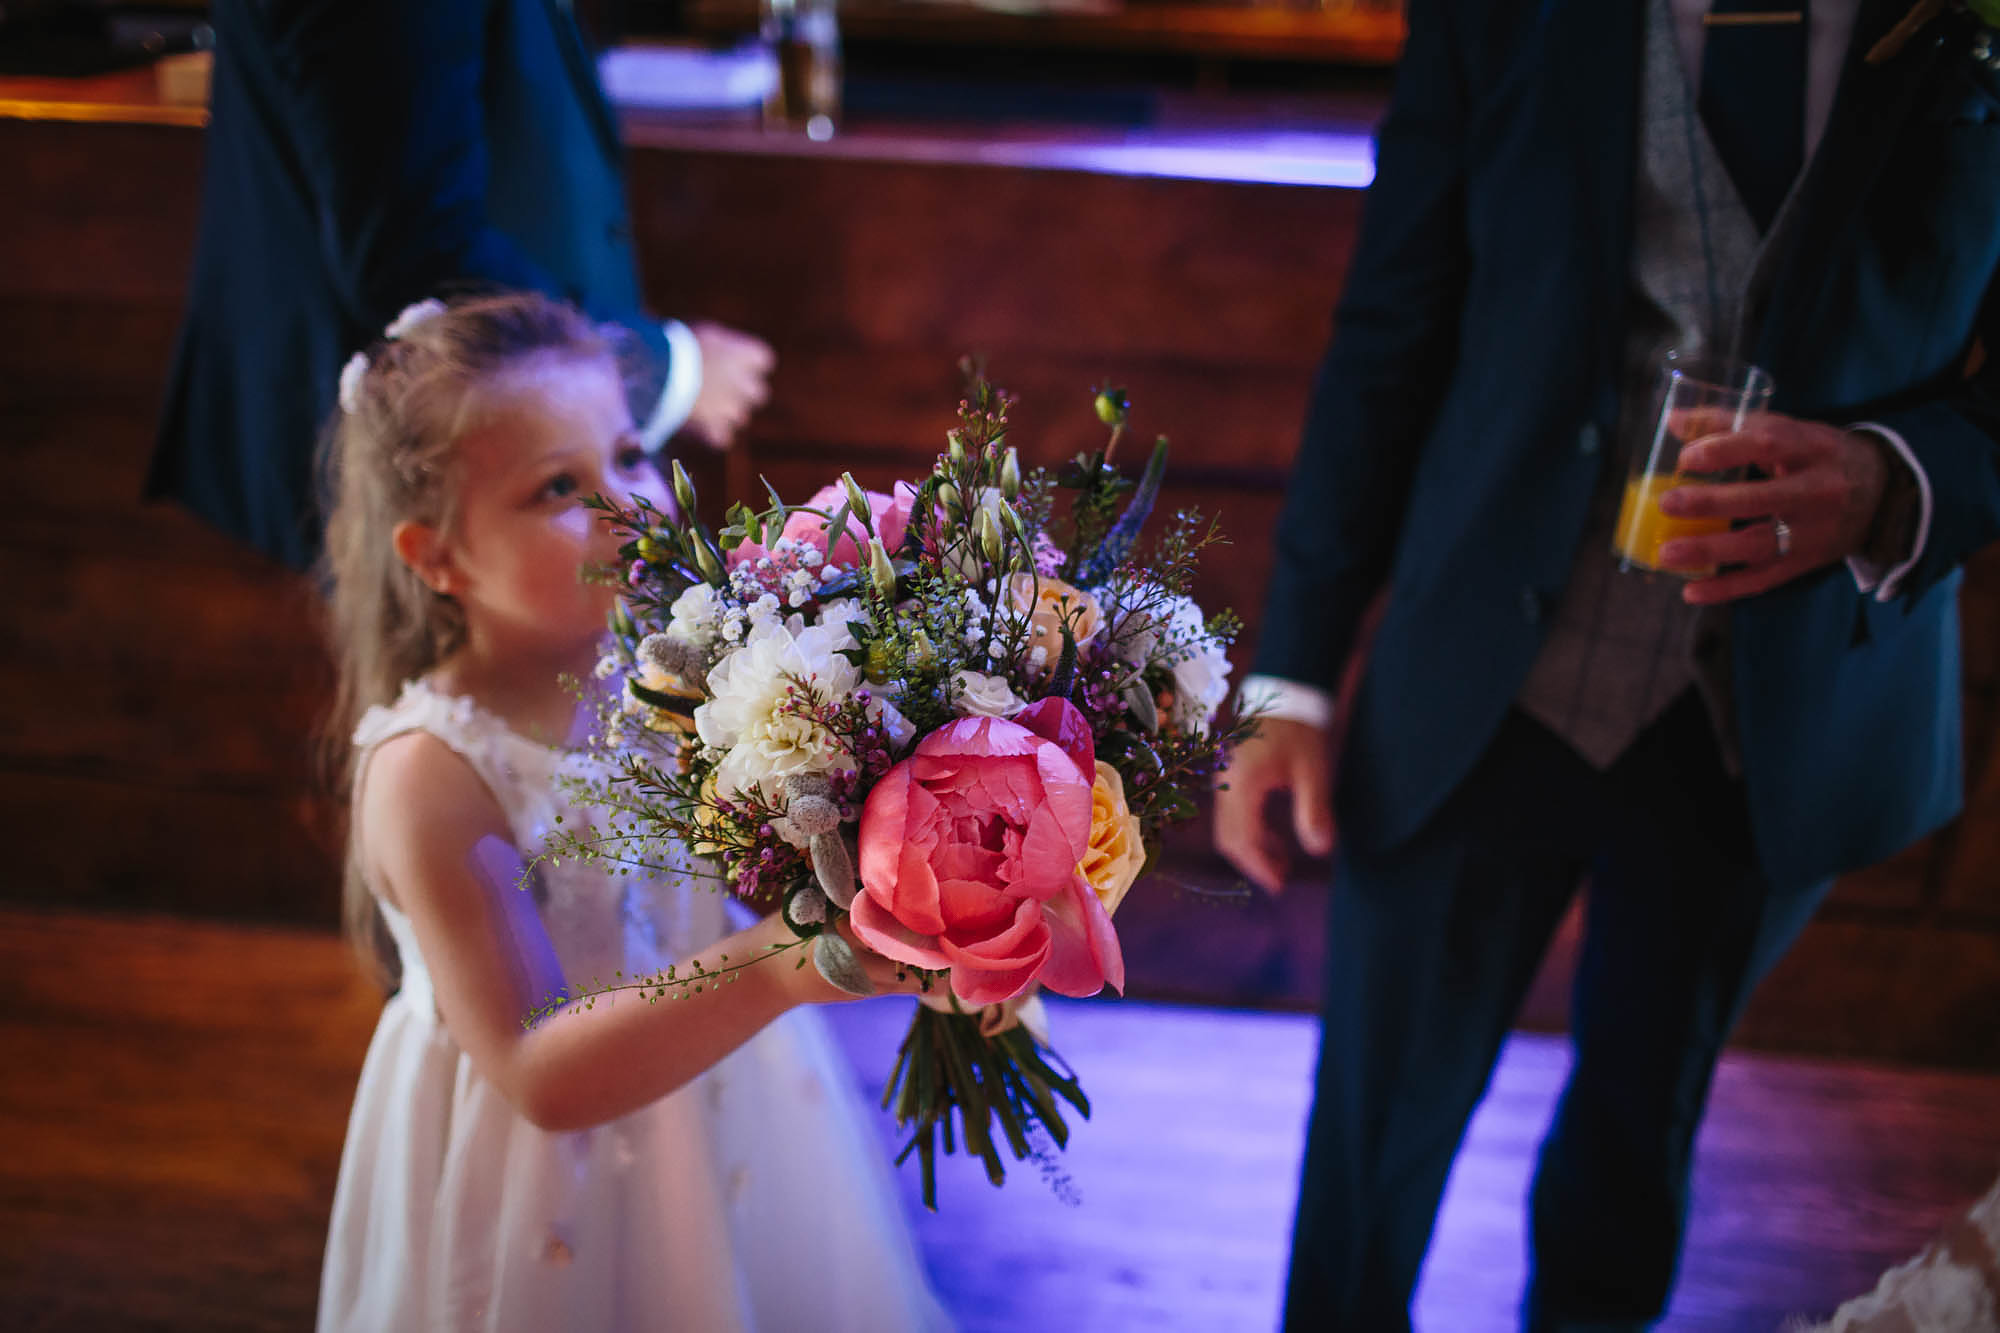 Flower girl holds the bouquet at a wedding